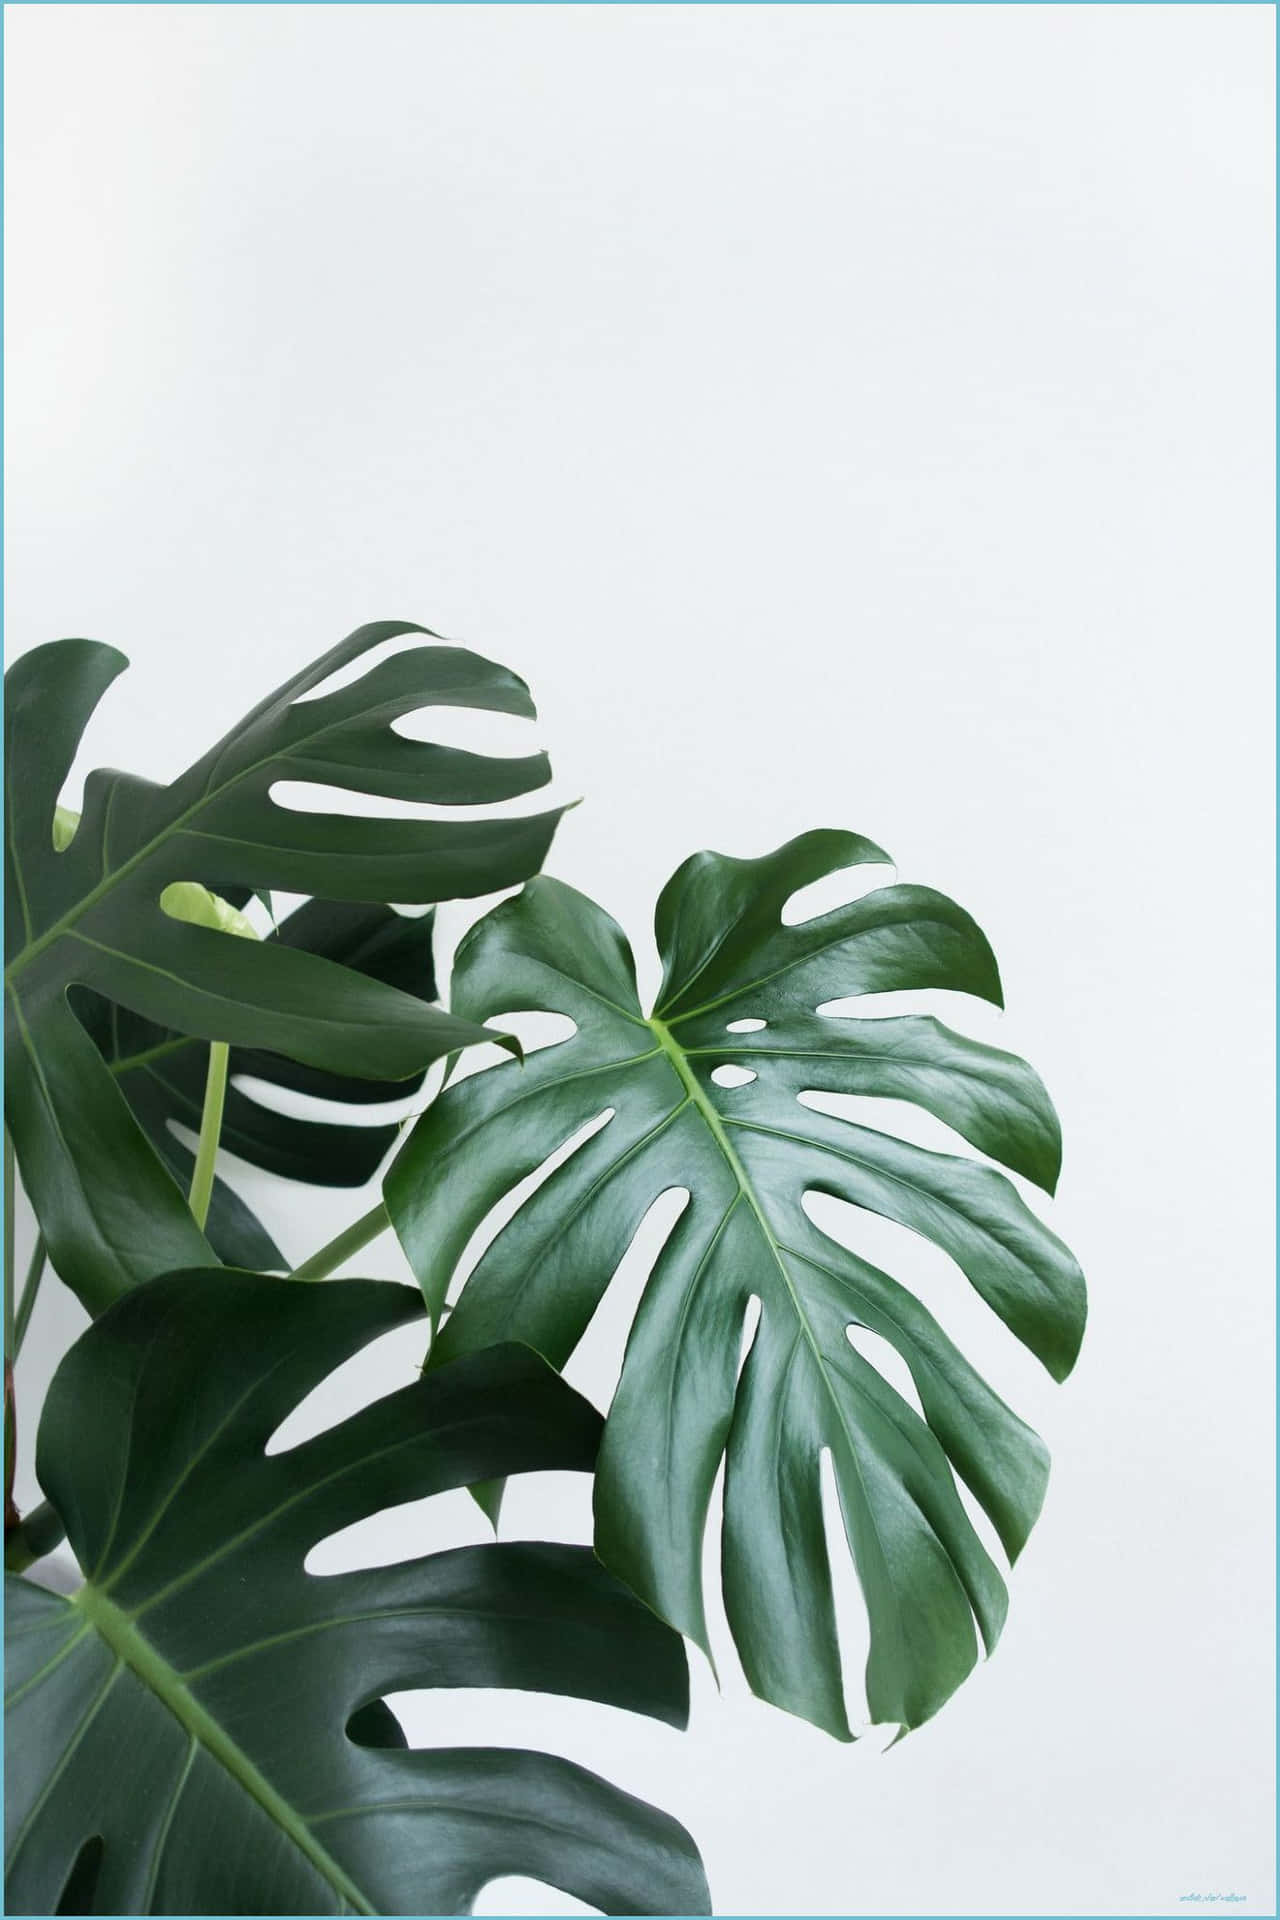 Embrace the Serenity of Nature with the Green Plant Aesthetic Wallpaper